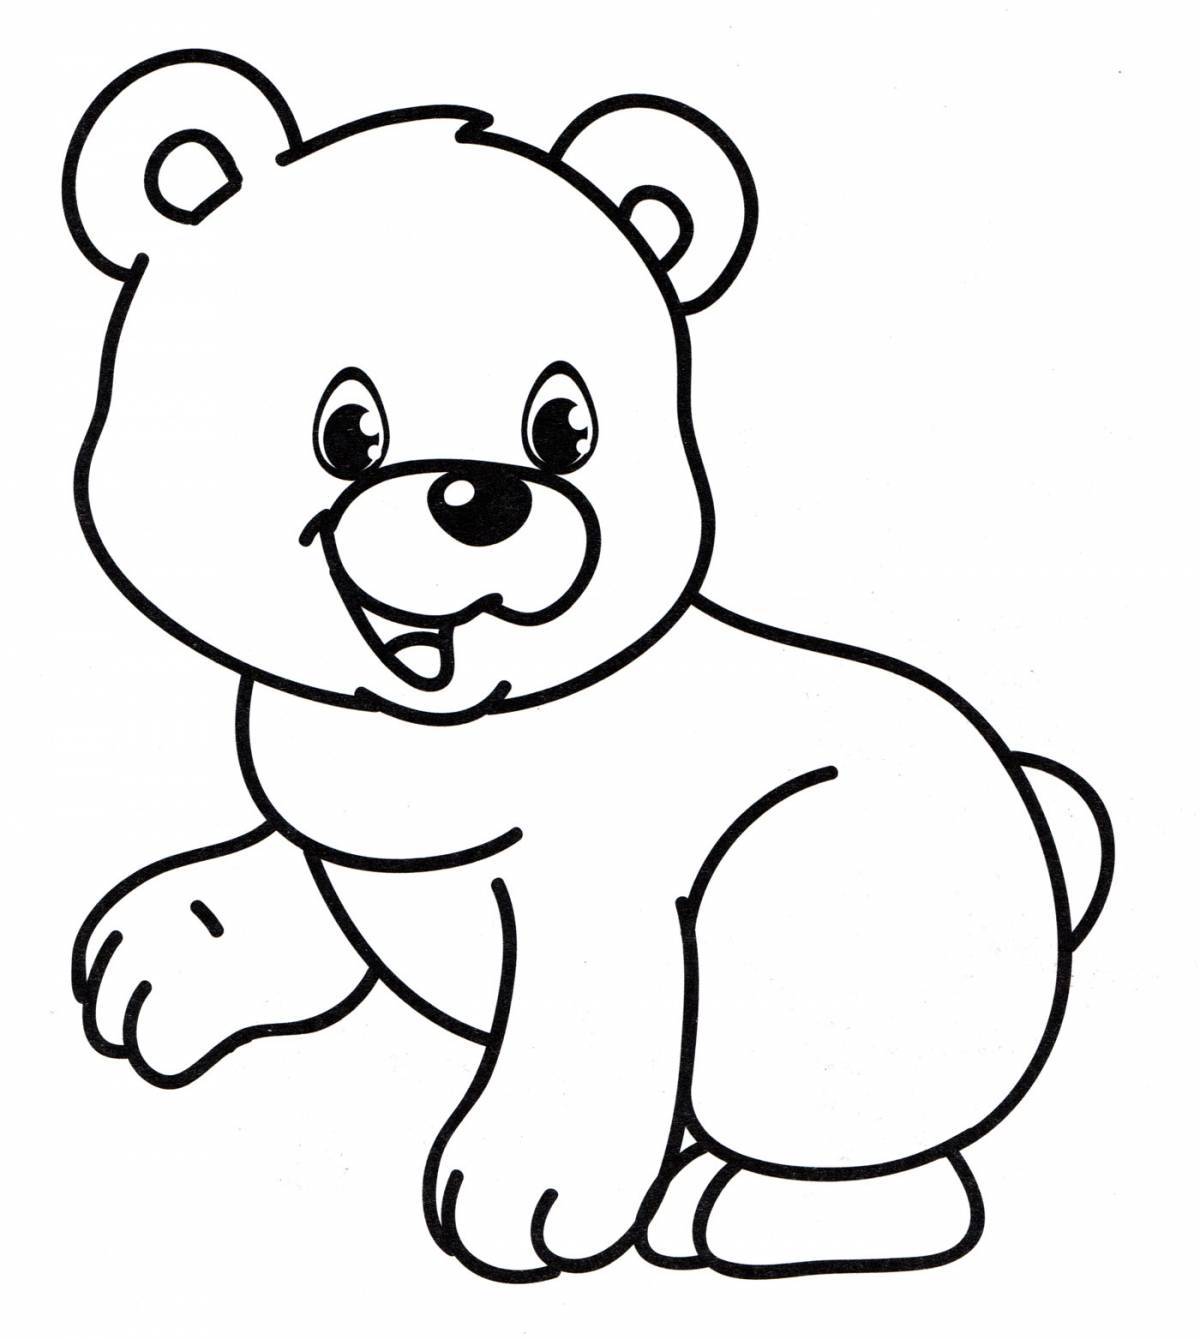 Colour coloring bear for children 3-4 years old